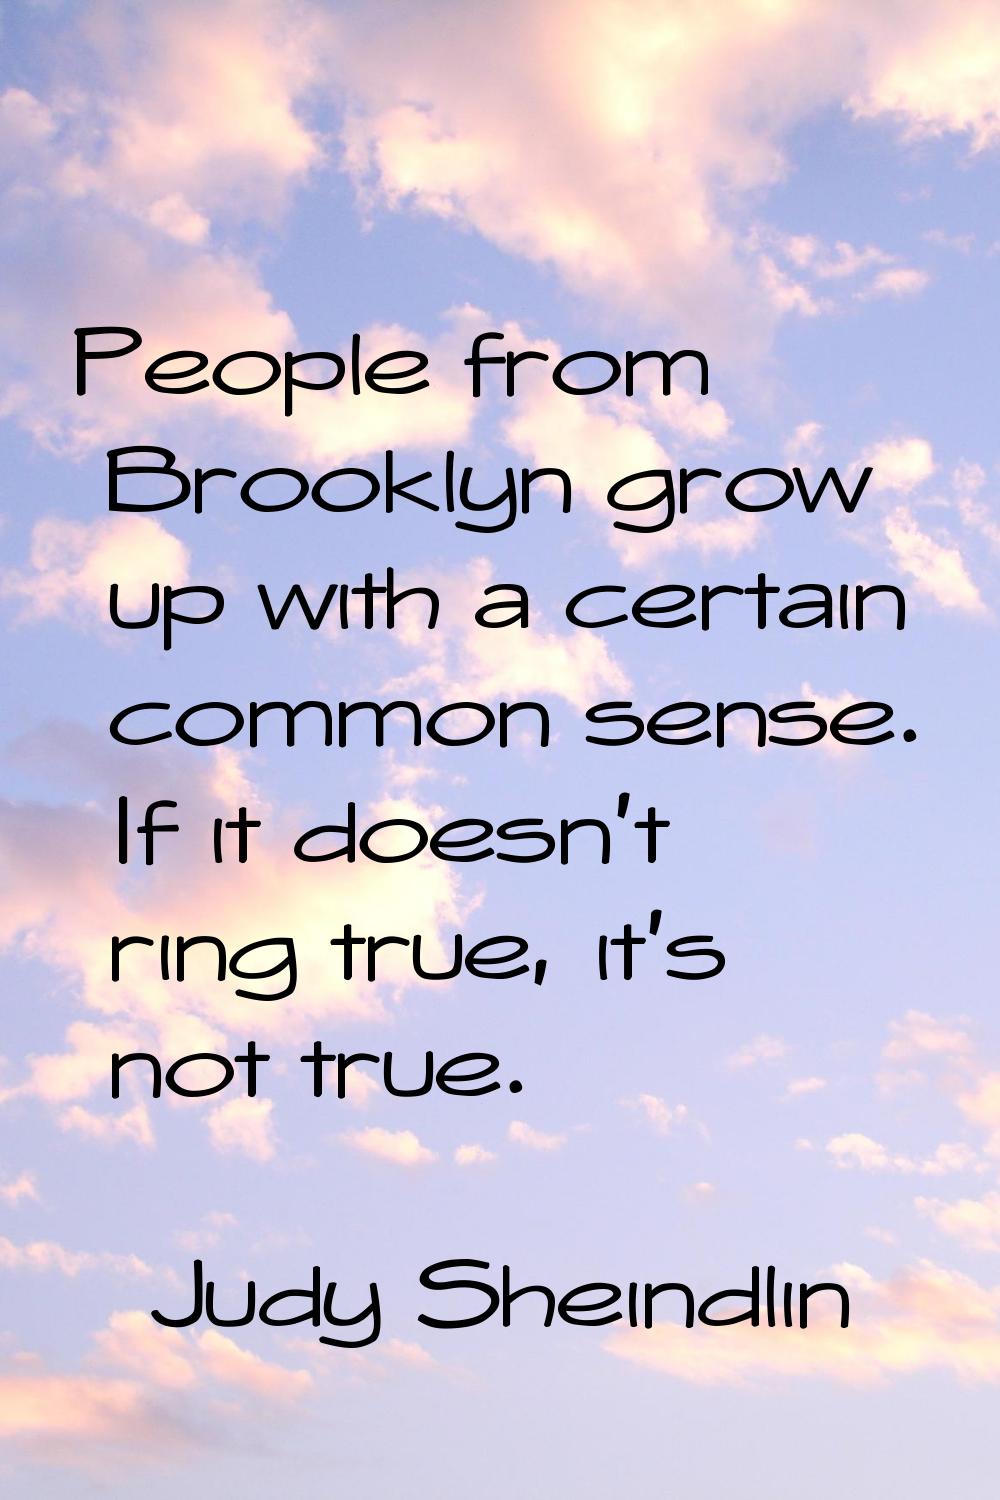 People from Brooklyn grow up with a certain common sense. If it doesn't ring true, it's not true.